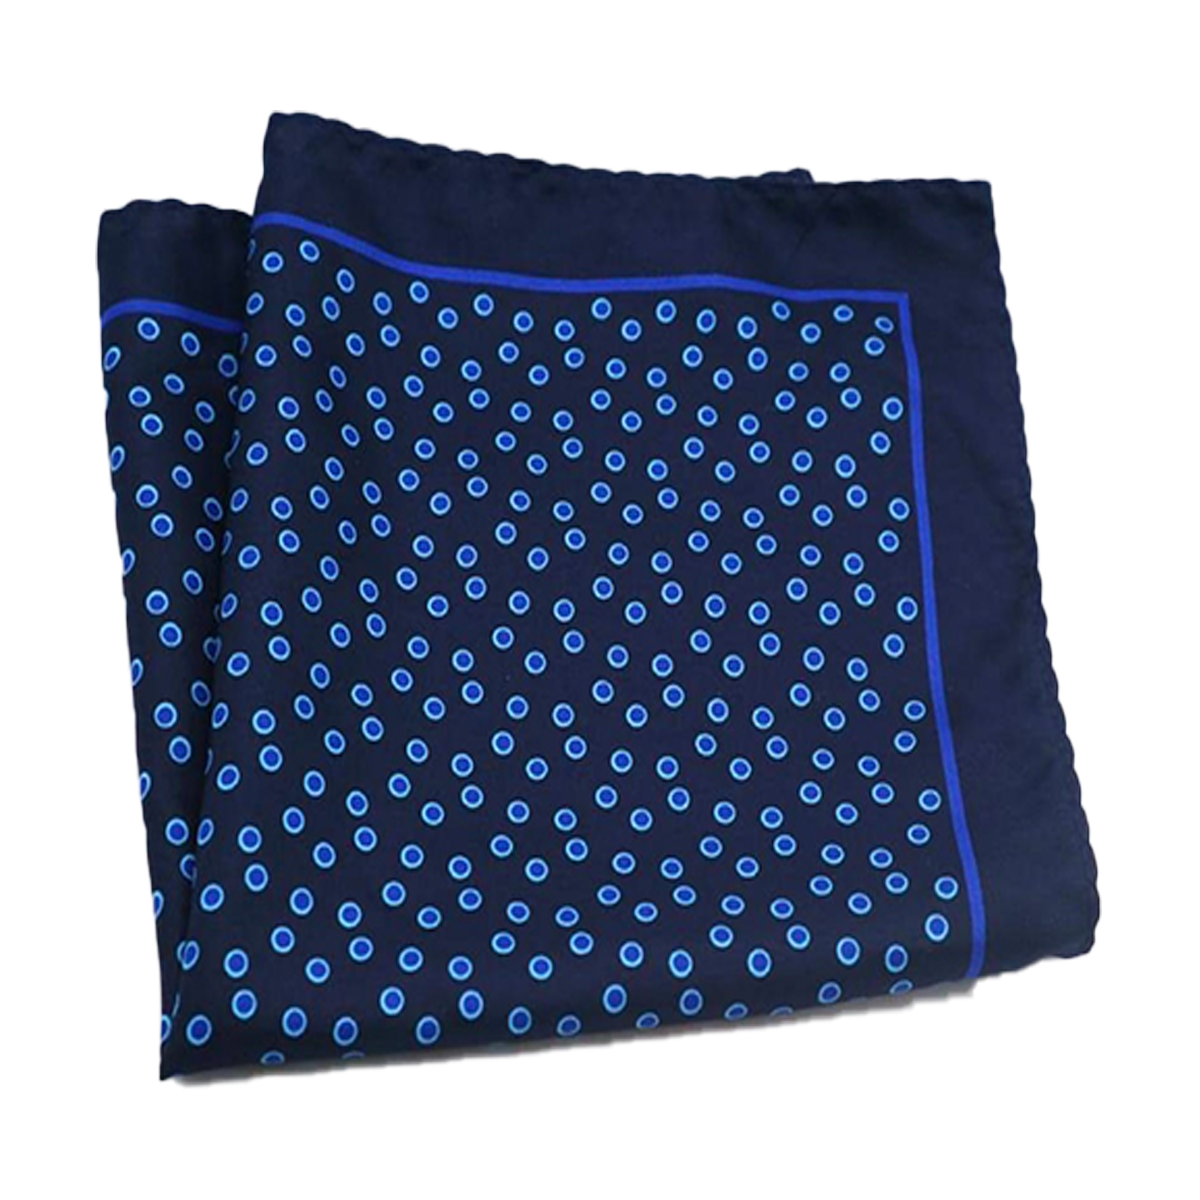 Tasker & Shaw | Luxury Menswear | Navy edged spotted, pure silk pocket square